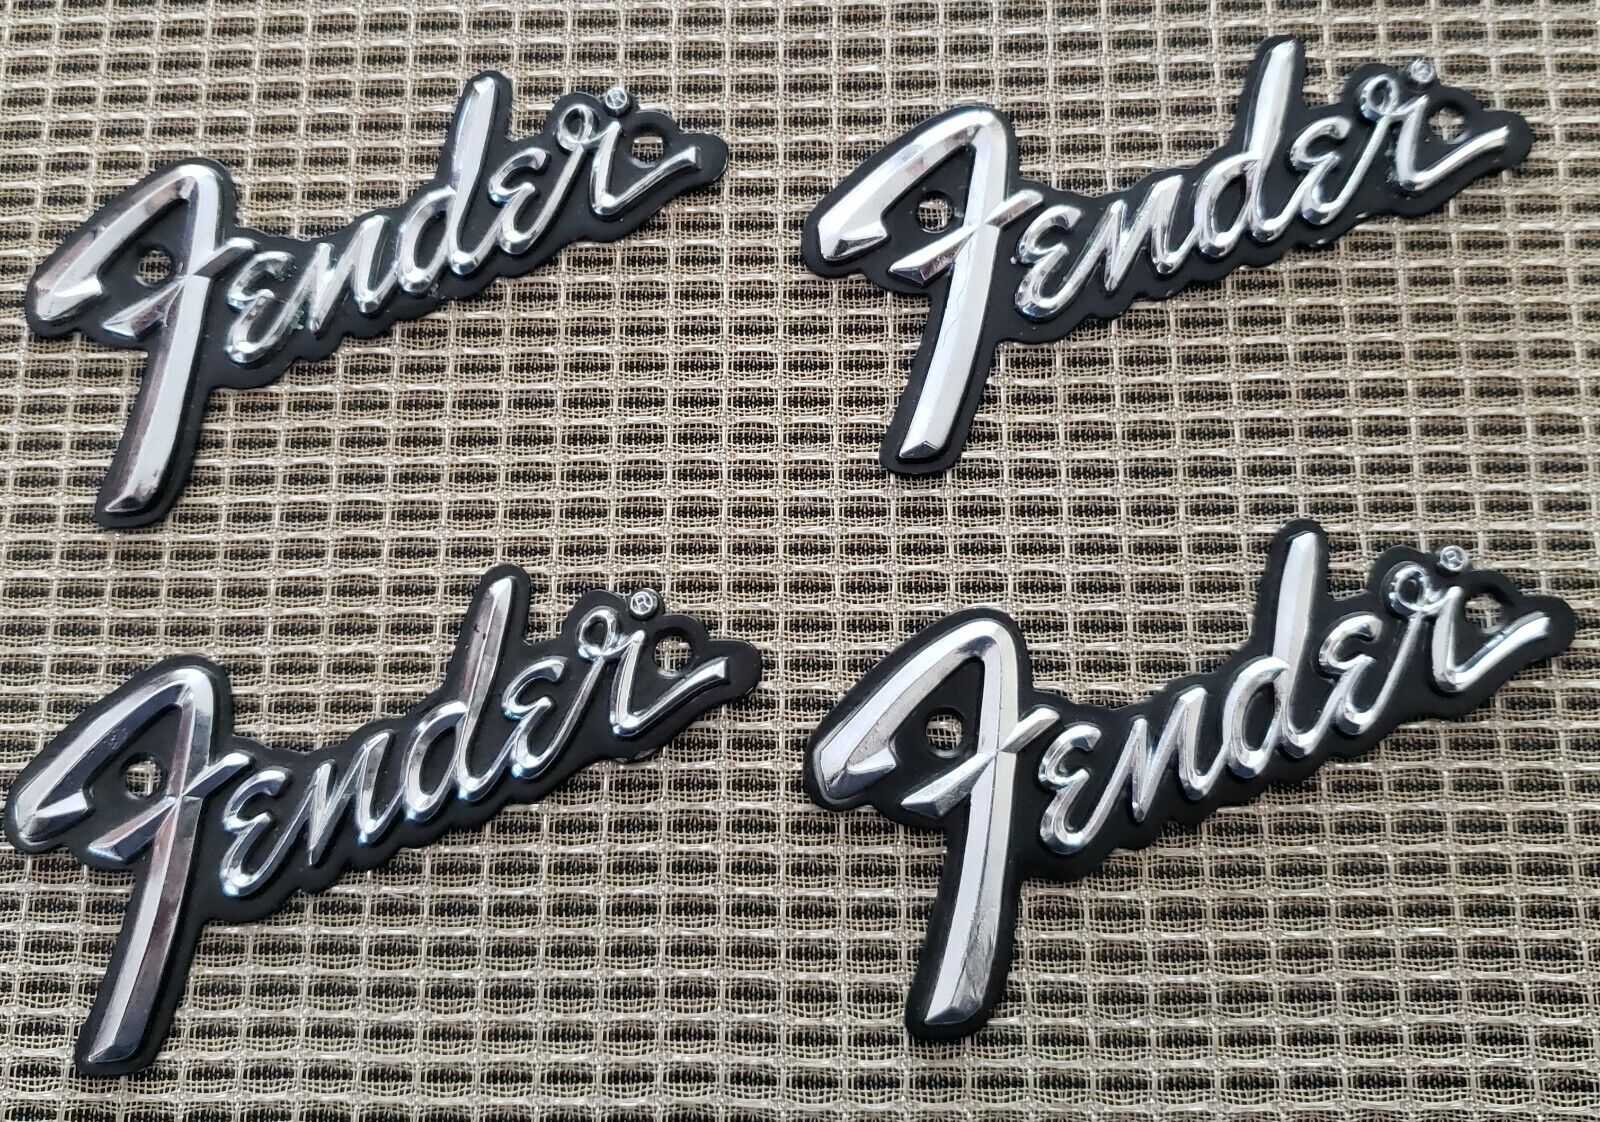 Lot of Four  Vintage Metal Fender Amp Logos for amps, OLD STOCK WHY PAY MORE? Без бренда